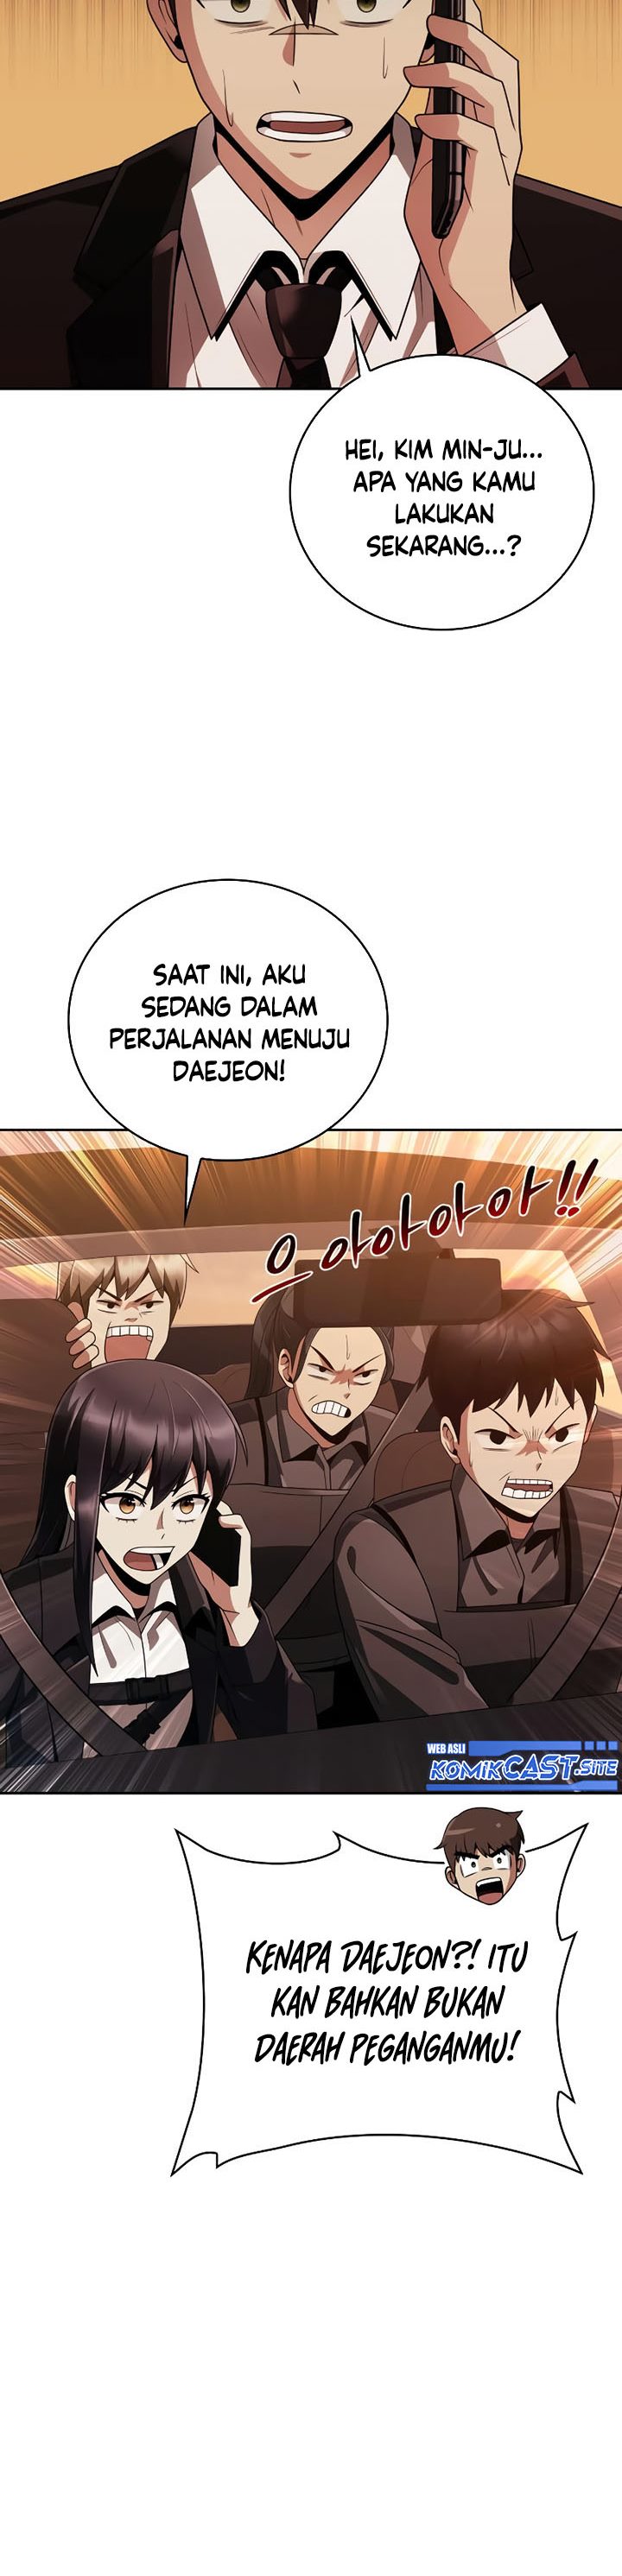 Dilarang COPAS - situs resmi www.mangacanblog.com - Komik clever cleaning life of the returned genius hunter 020 - chapter 20 21 Indonesia clever cleaning life of the returned genius hunter 020 - chapter 20 Terbaru 36|Baca Manga Komik Indonesia|Mangacan